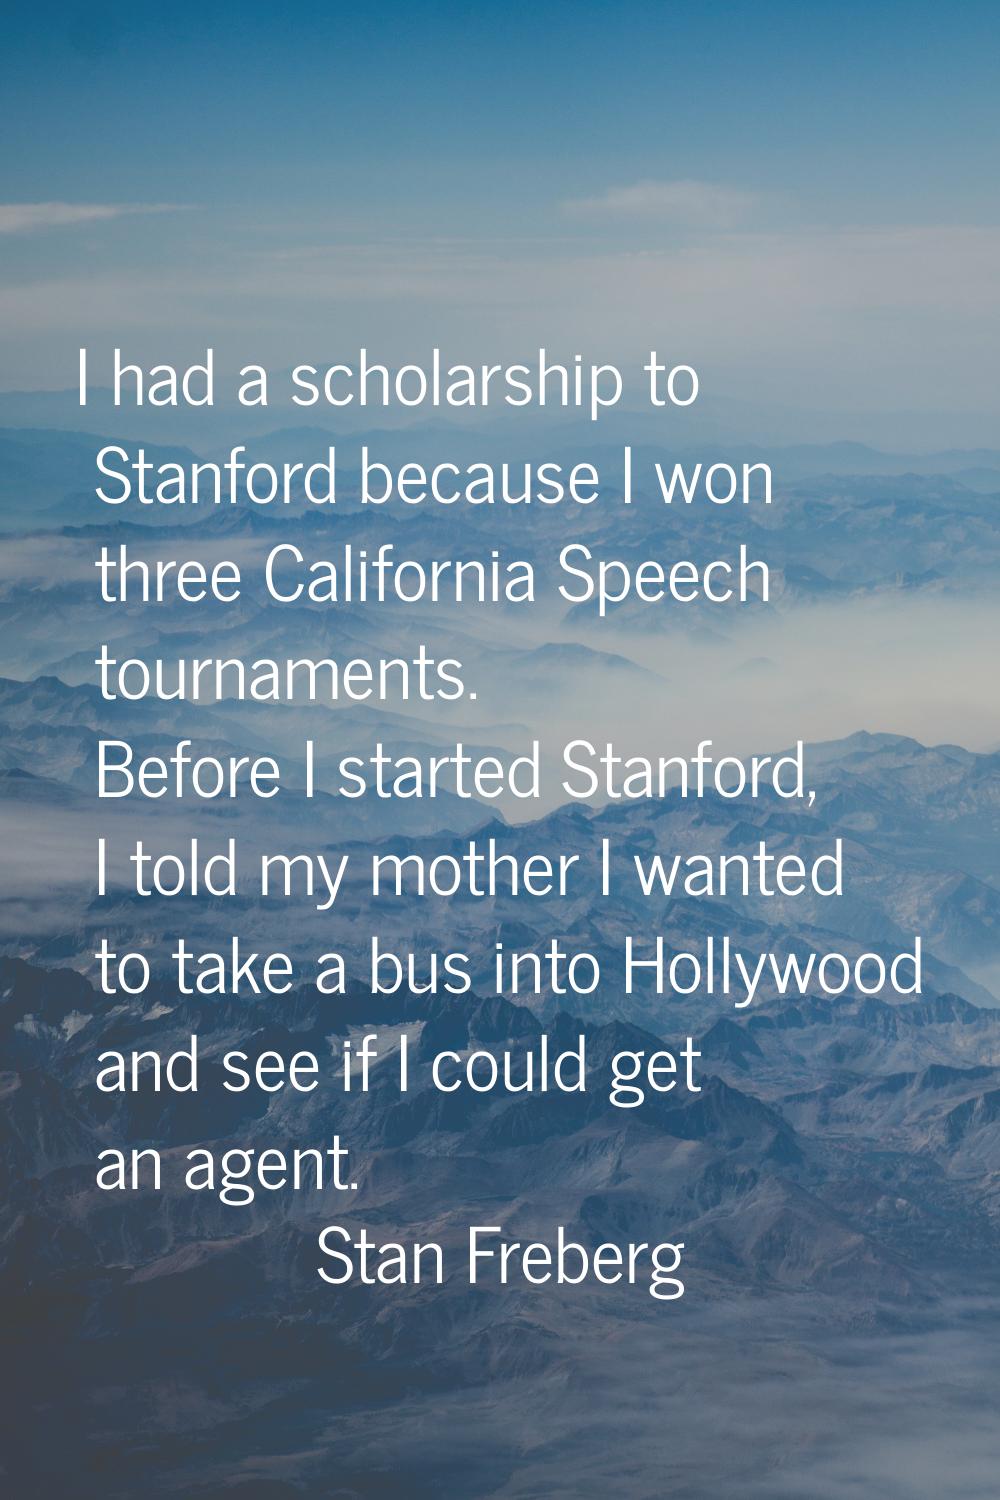 I had a scholarship to Stanford because I won three California Speech tournaments. Before I started